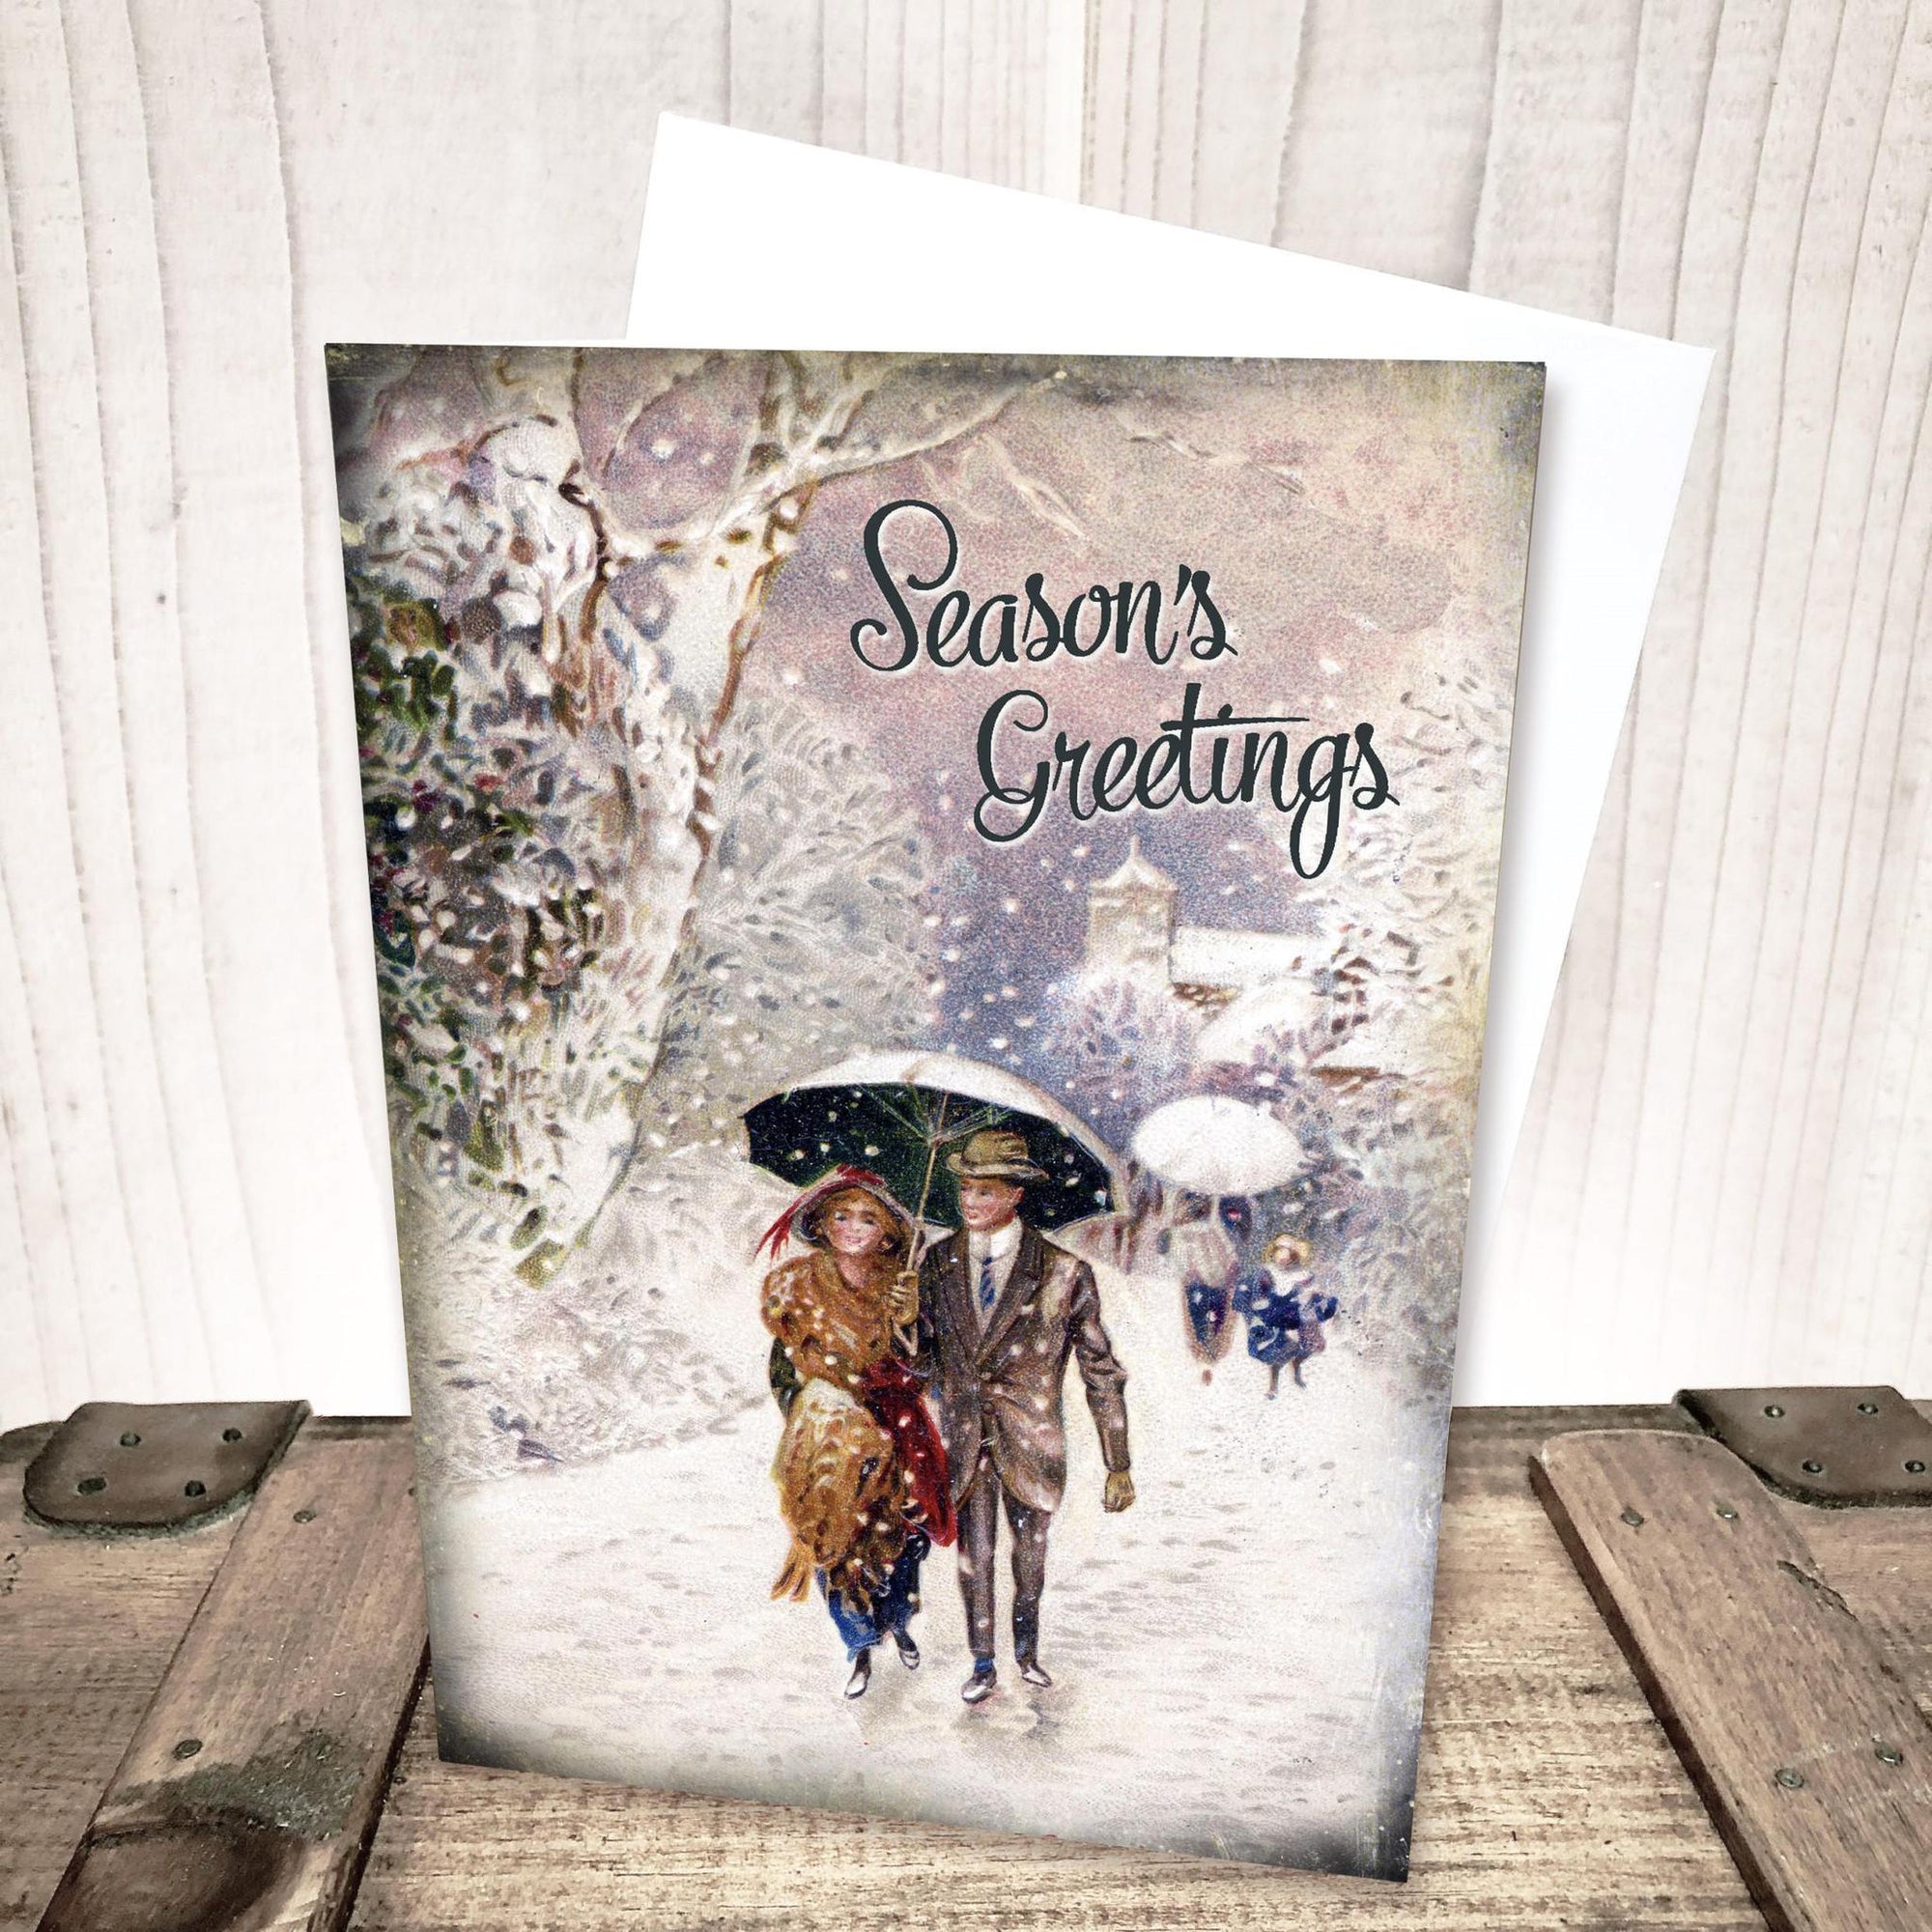 Vintage Winter Season's Greeting Christmas Card by Yesterday's Best